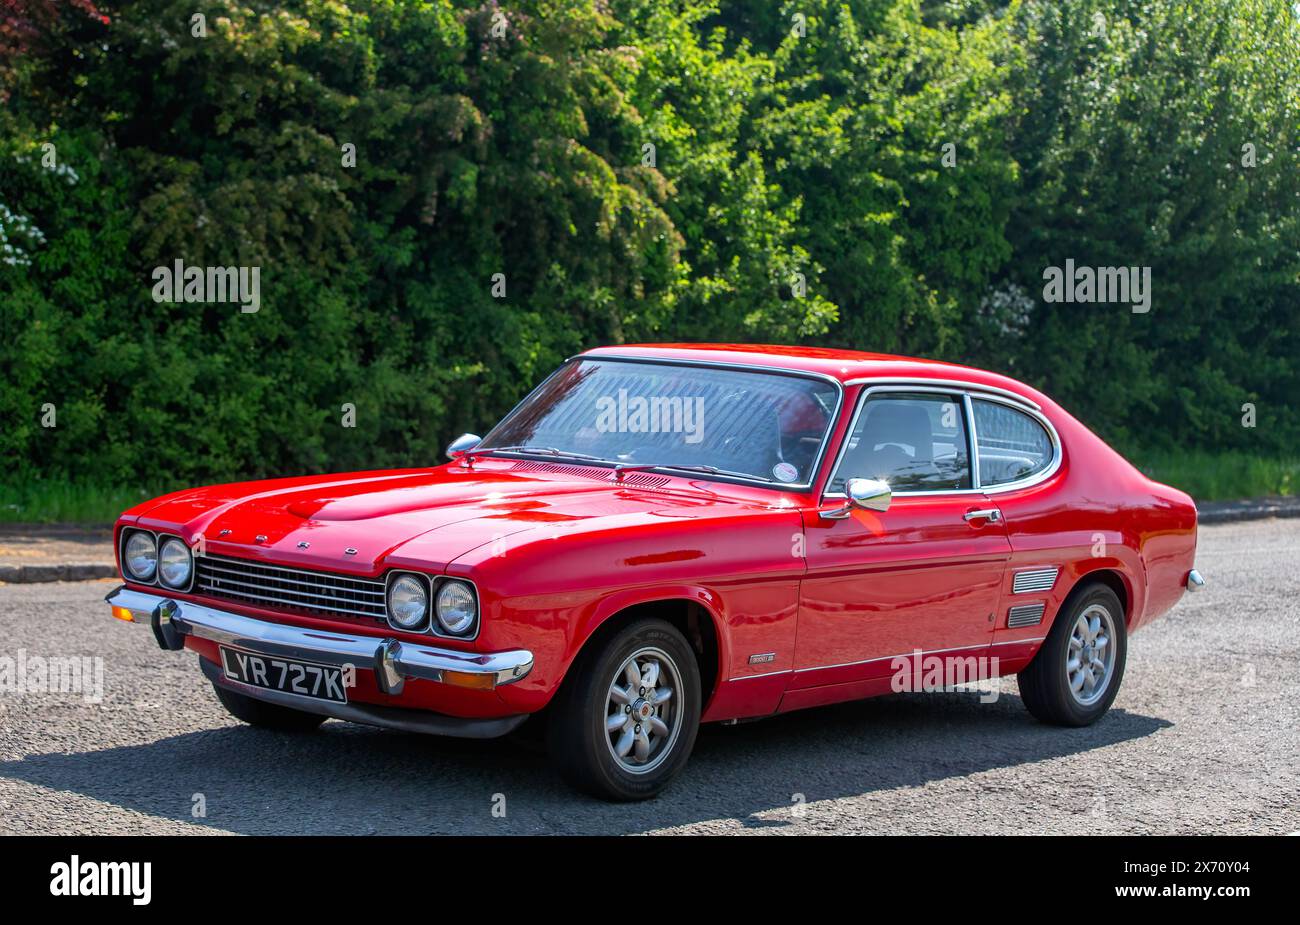 Stoke Goldington,UK - May 11th 2024:1972 red Ford Capri classic car driving on a British road Stock Photo